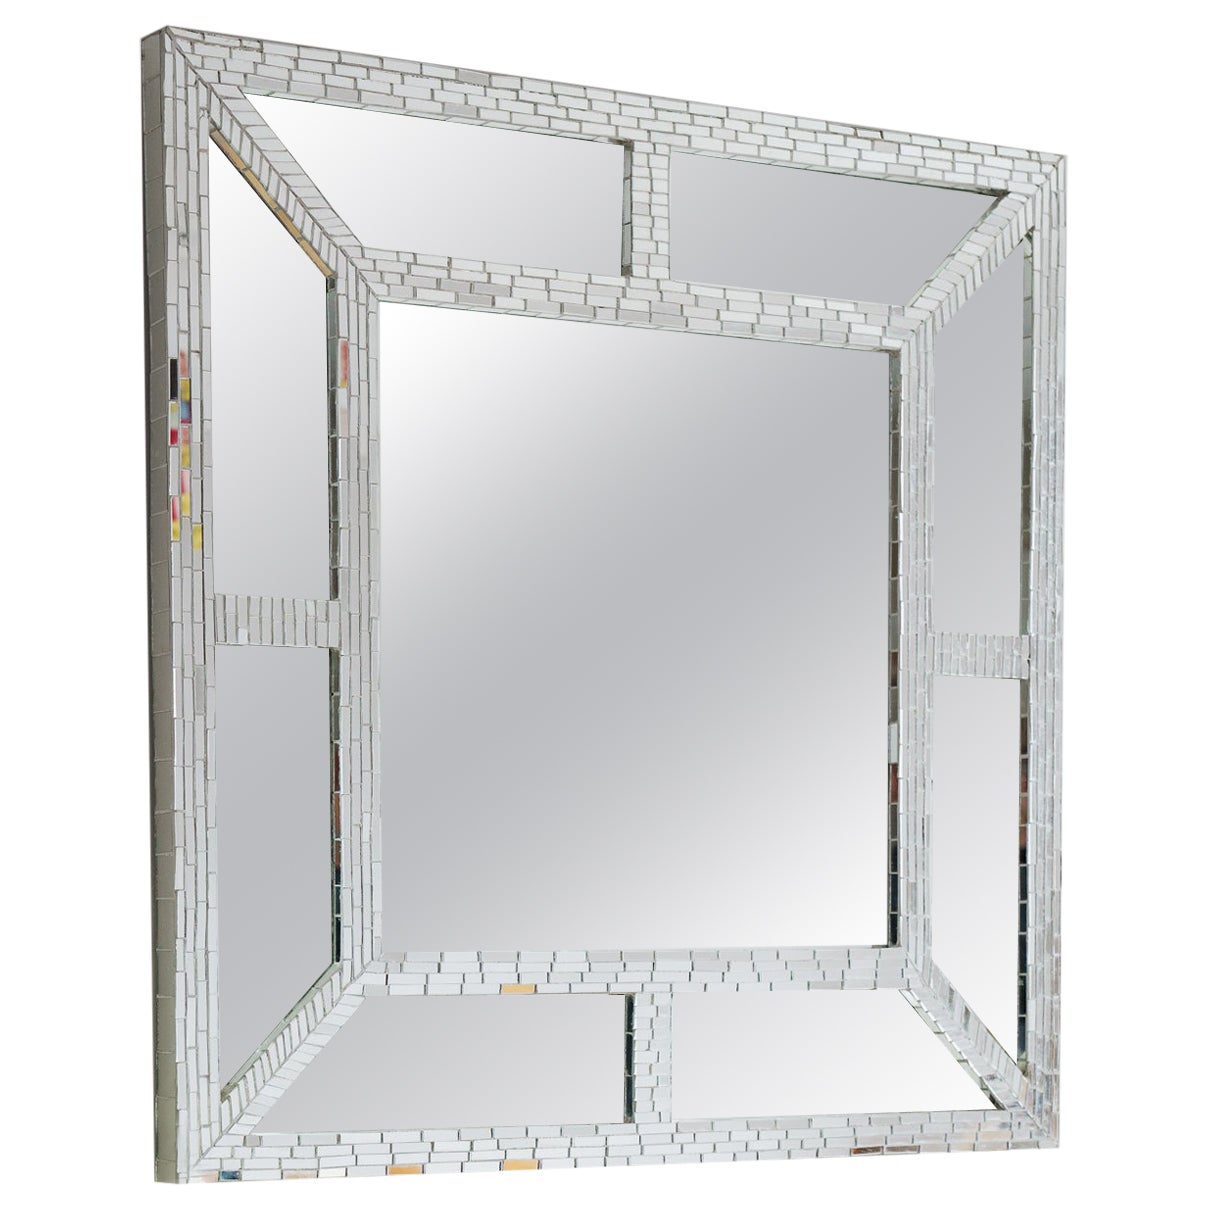 Square Ventana Mosaic Mirror, Handmade in UK by Claire Nayman